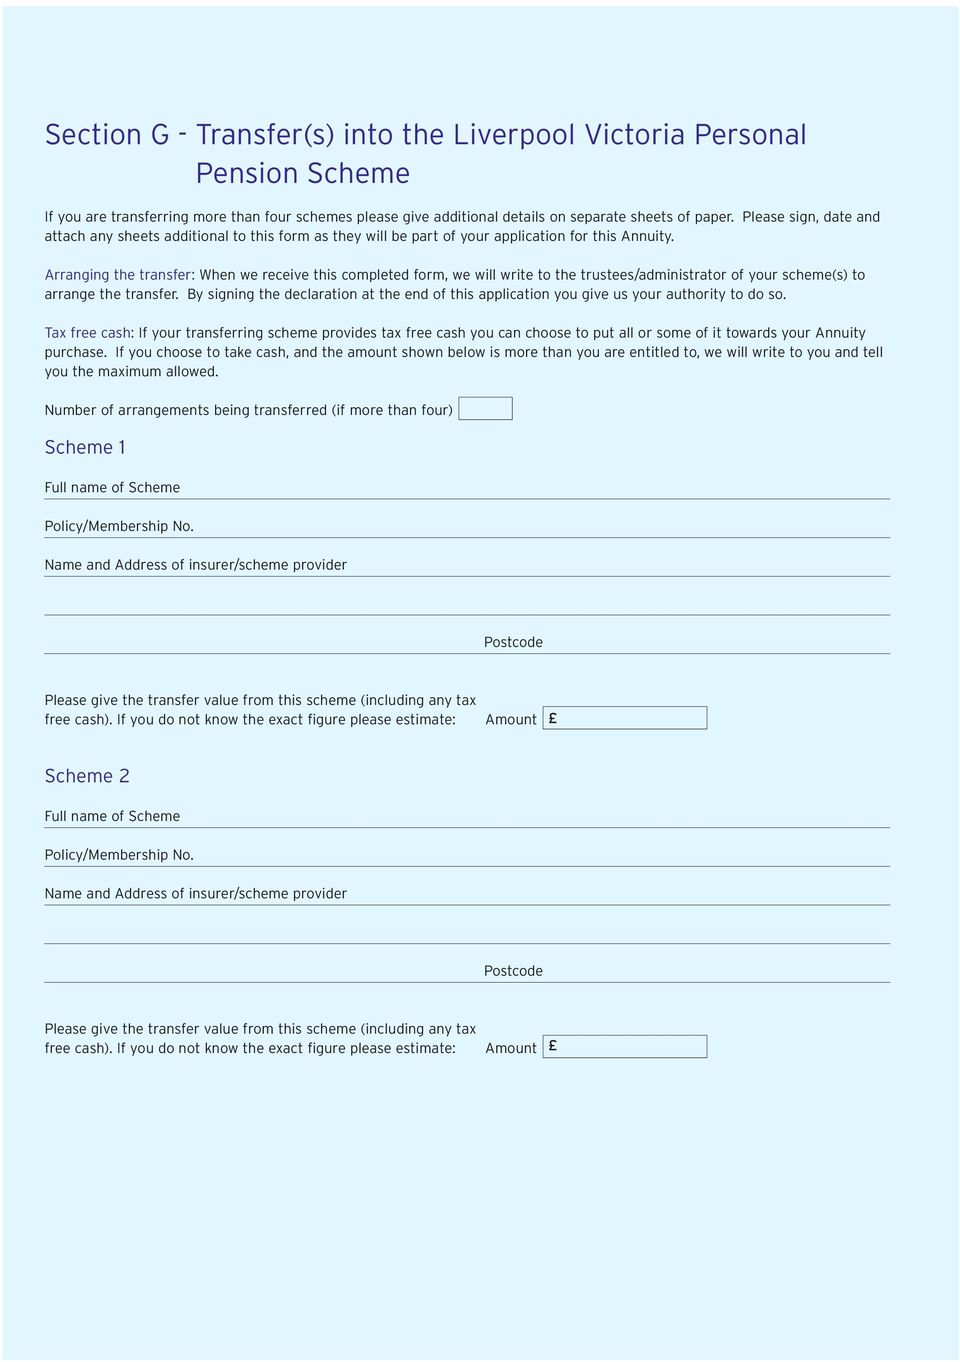 Arranging the transfer: When we receive this completed form, we will write to the trustees/administrator of your scheme(s) to arrange the transfer.